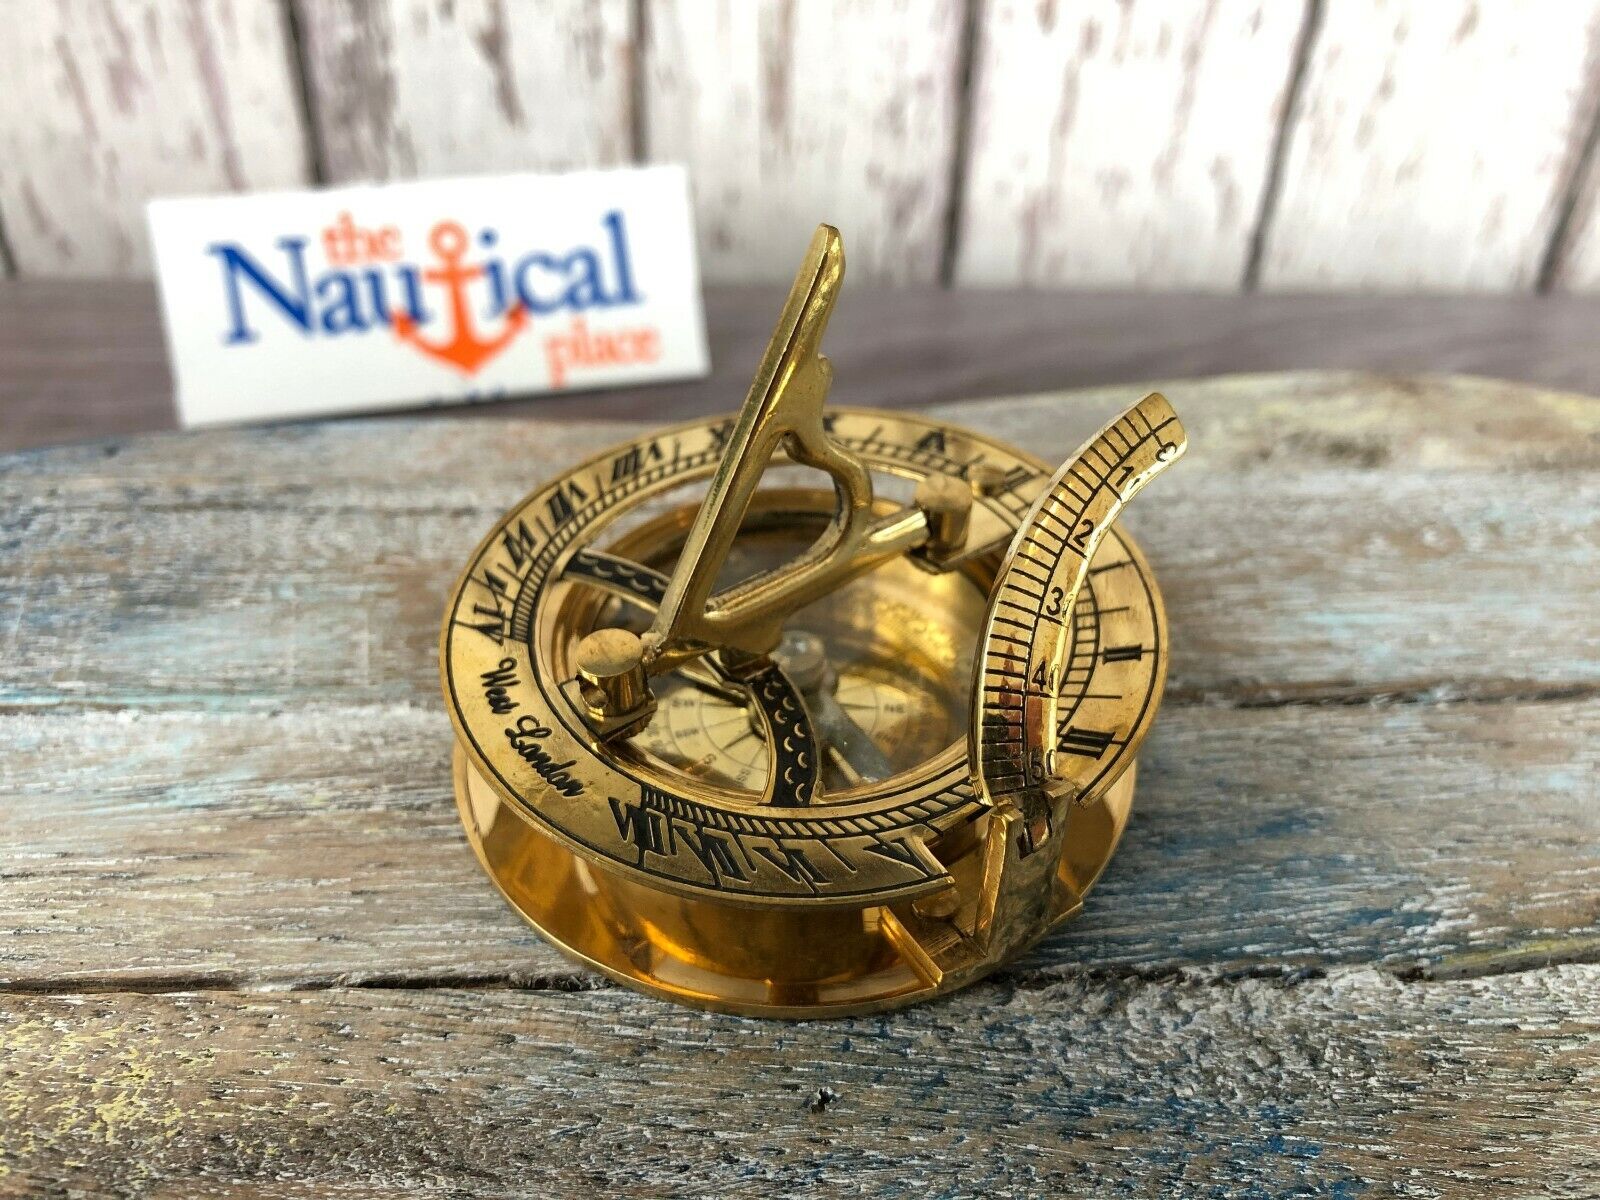 Brass Sundial Compass - Polished Finish - Old Vintage Antique Style - Nautical